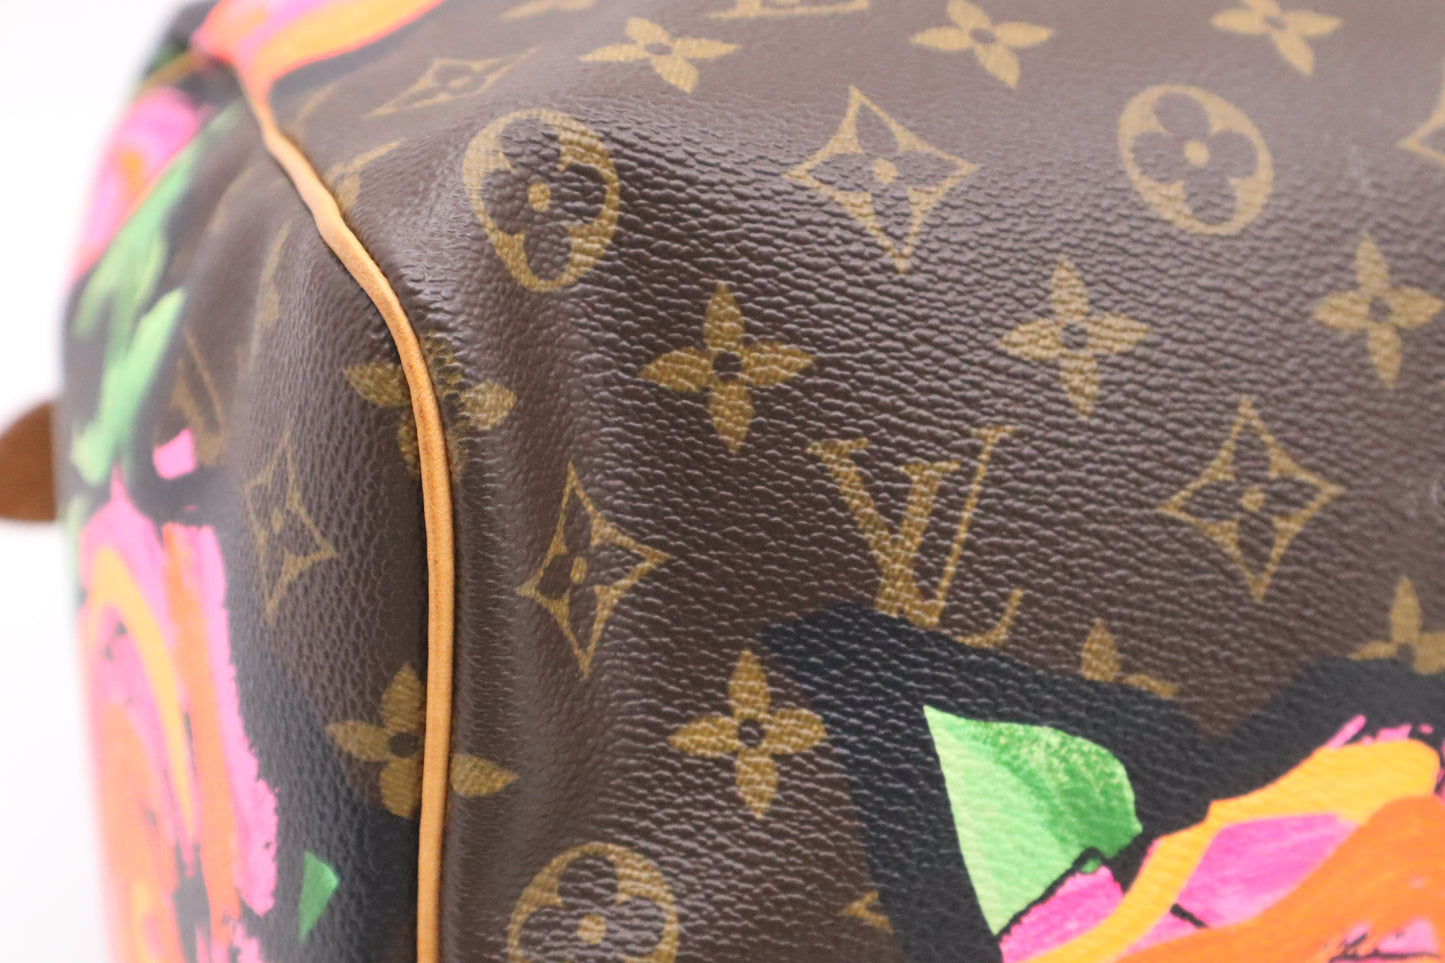 Louis Vuitton x Stephen Sprouse Keepall 50 in Roses Monogram Canvas